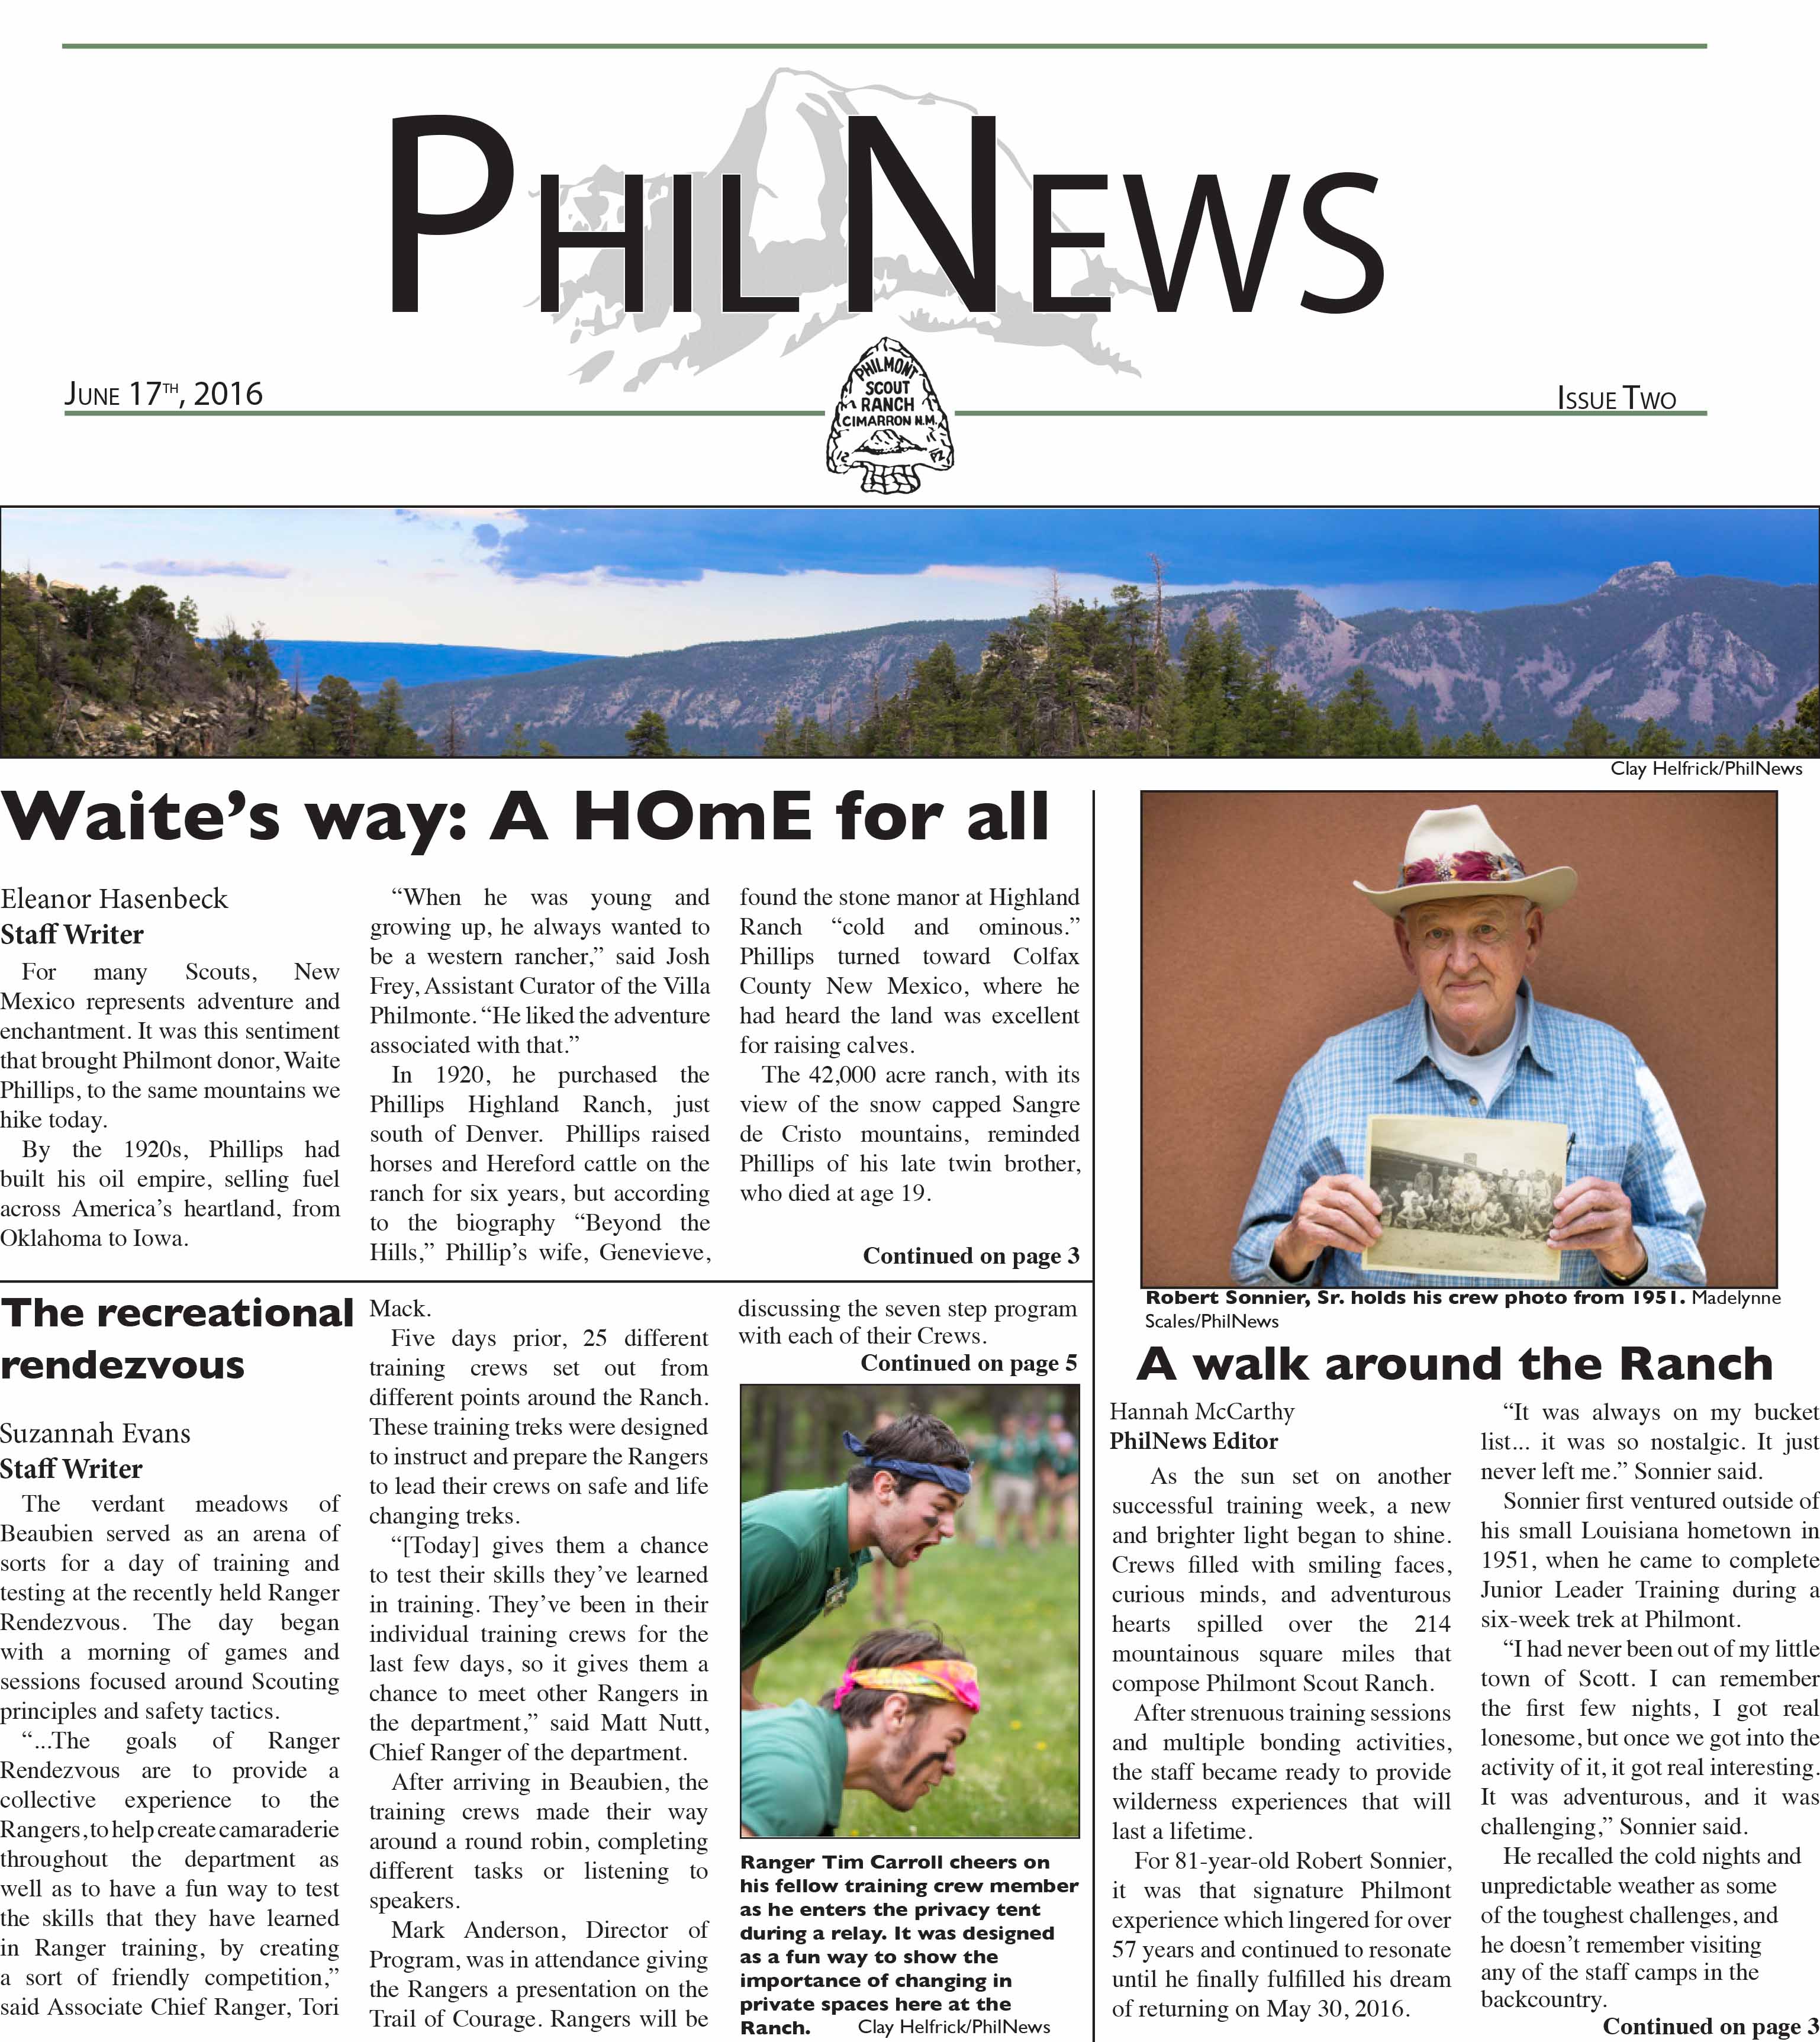 June 17, 2016 Issue 2